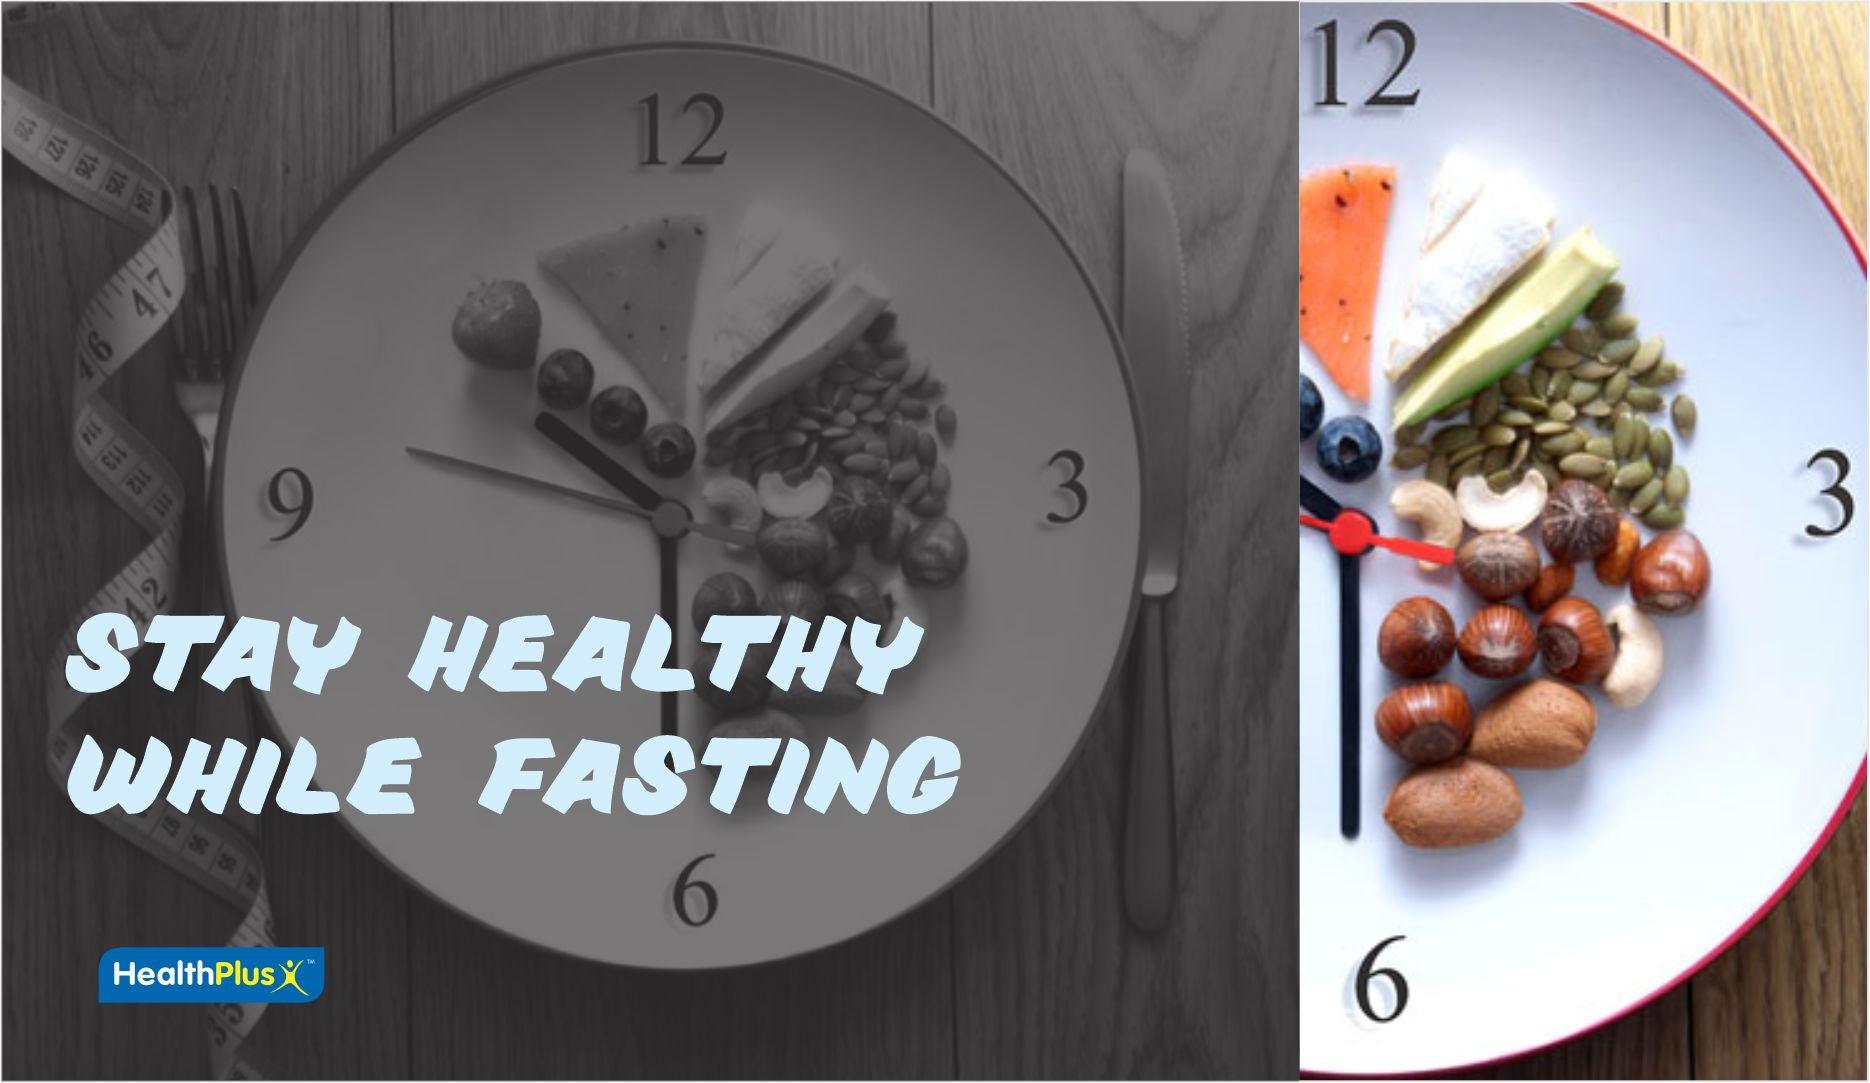 Stay Healthy While Fasting - HealthPlus